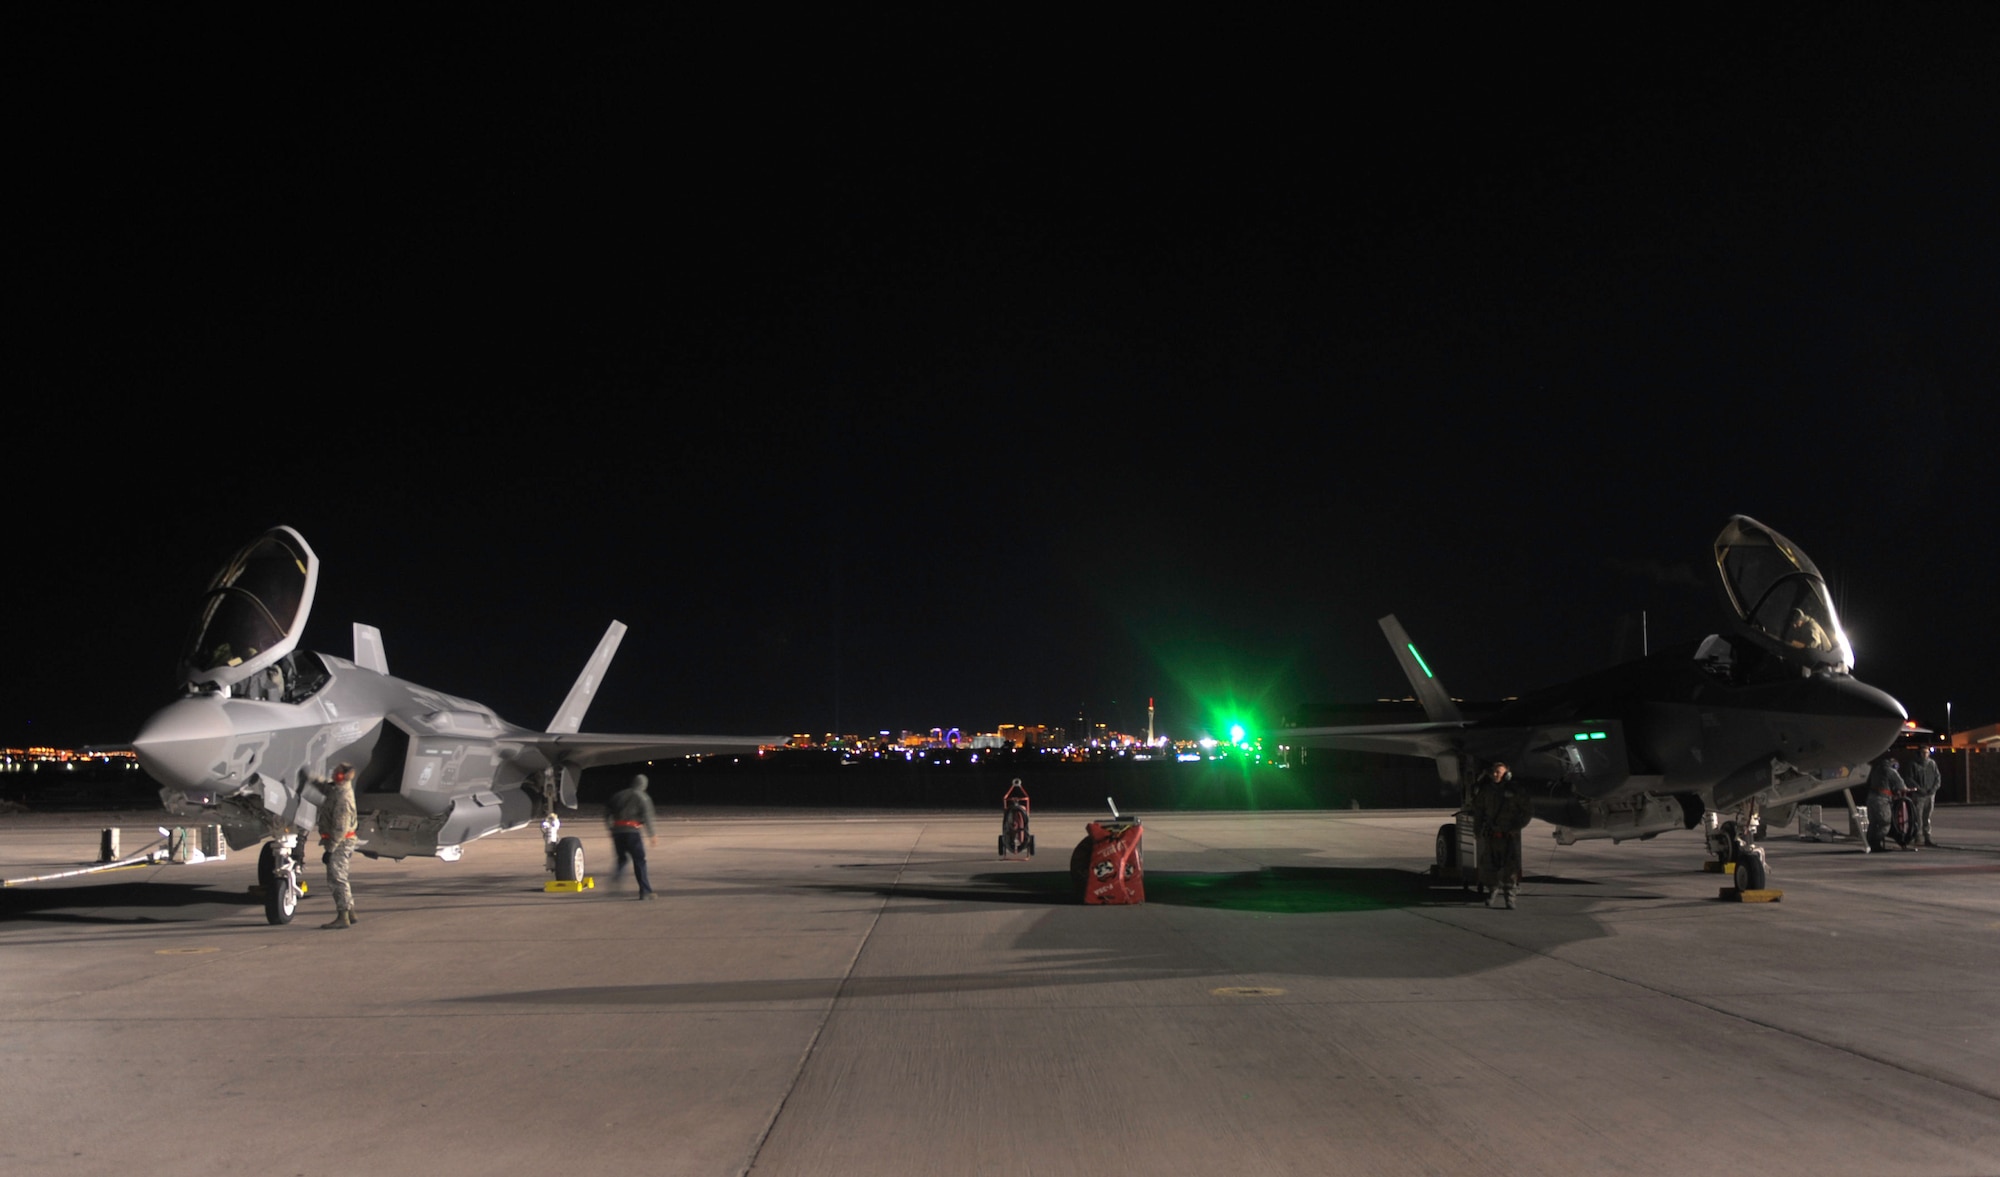 Maintainers assigned to the 419th and 388th Fighter Wings, Hill Air Force Base, Utah, prepare two F-35A Lightning II aircraft to participate in Red Flag 17-1 night operations on Nellis Air Force Base, Nev., Jan. 24, 2017. Night missions have been integrated into Red Flag to prepare aircrews for missions in low-light environments. (U.S. Air Force photo by Airman 1st Class Kevin Tanenbaum/Released) 